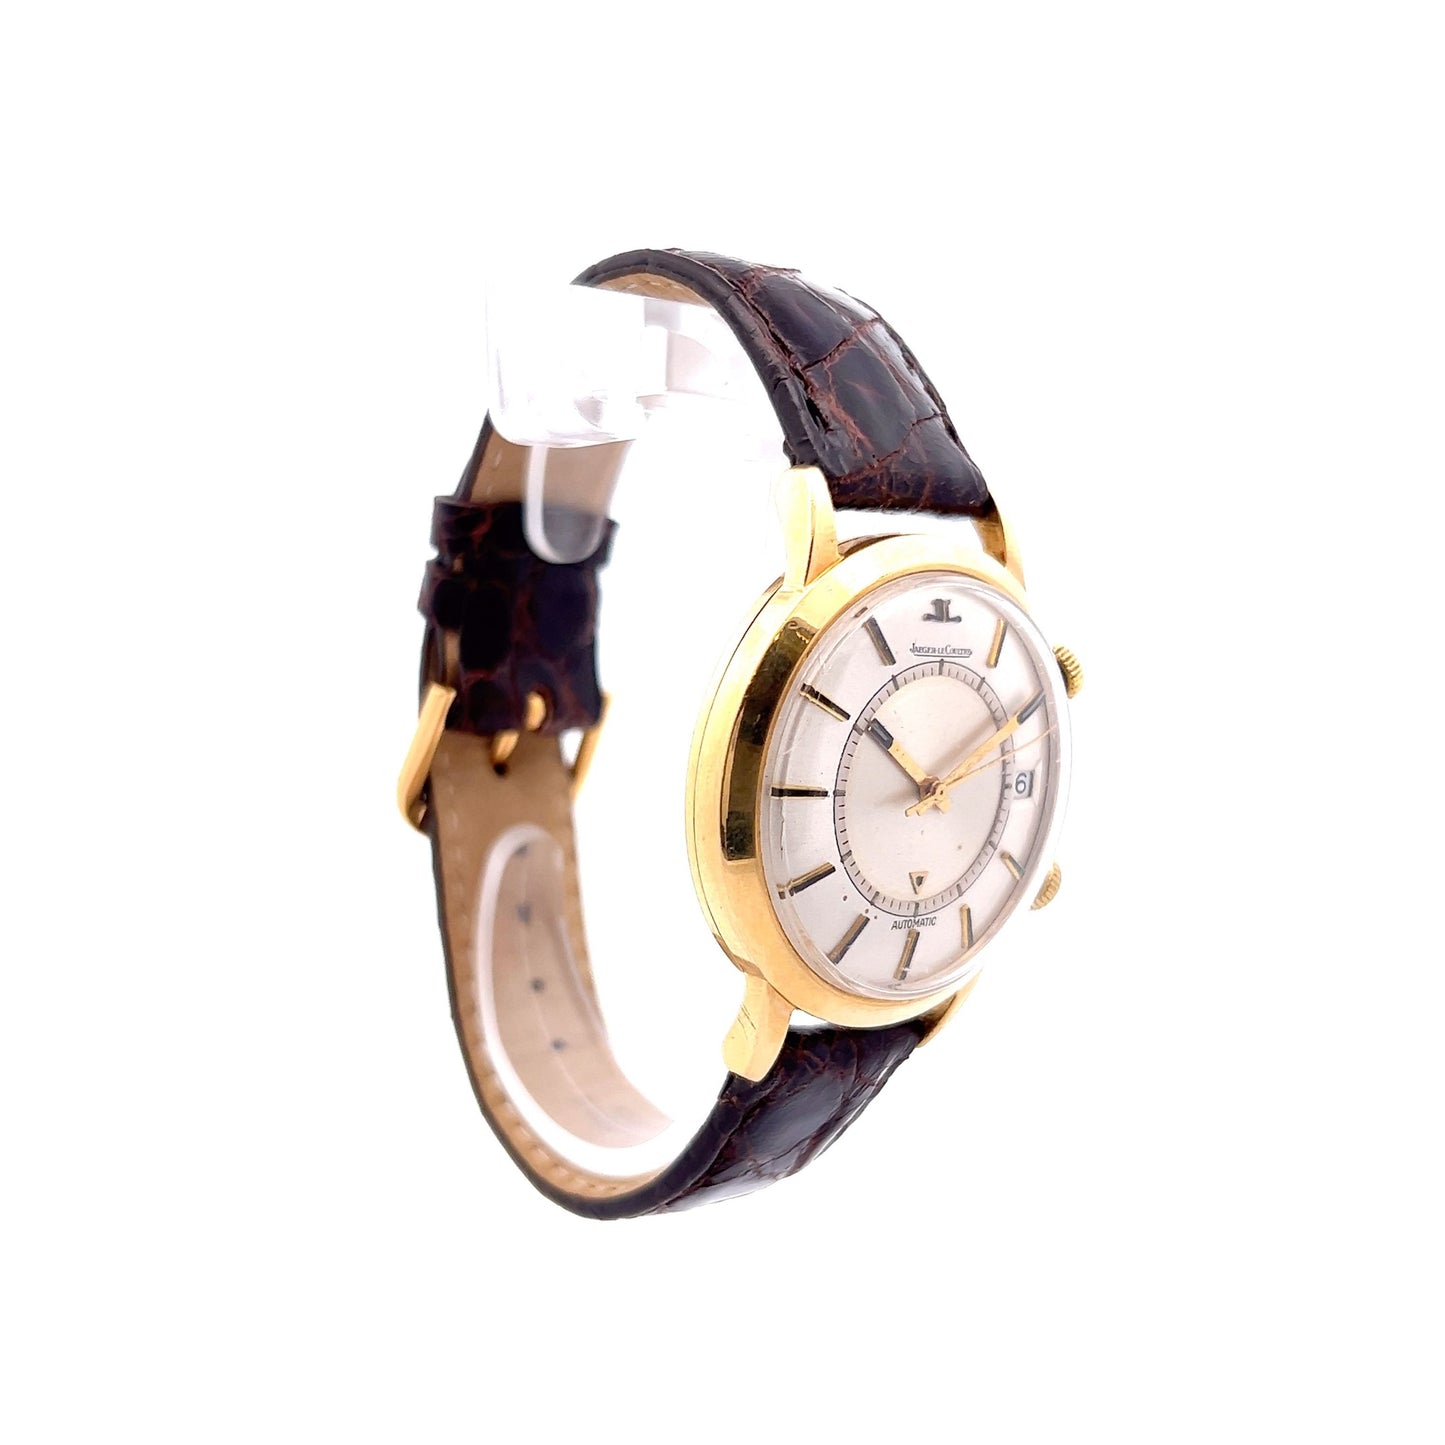 Jaeger Le Coultre Memovox 18K Yellow Gold Alarm Watch 1960's